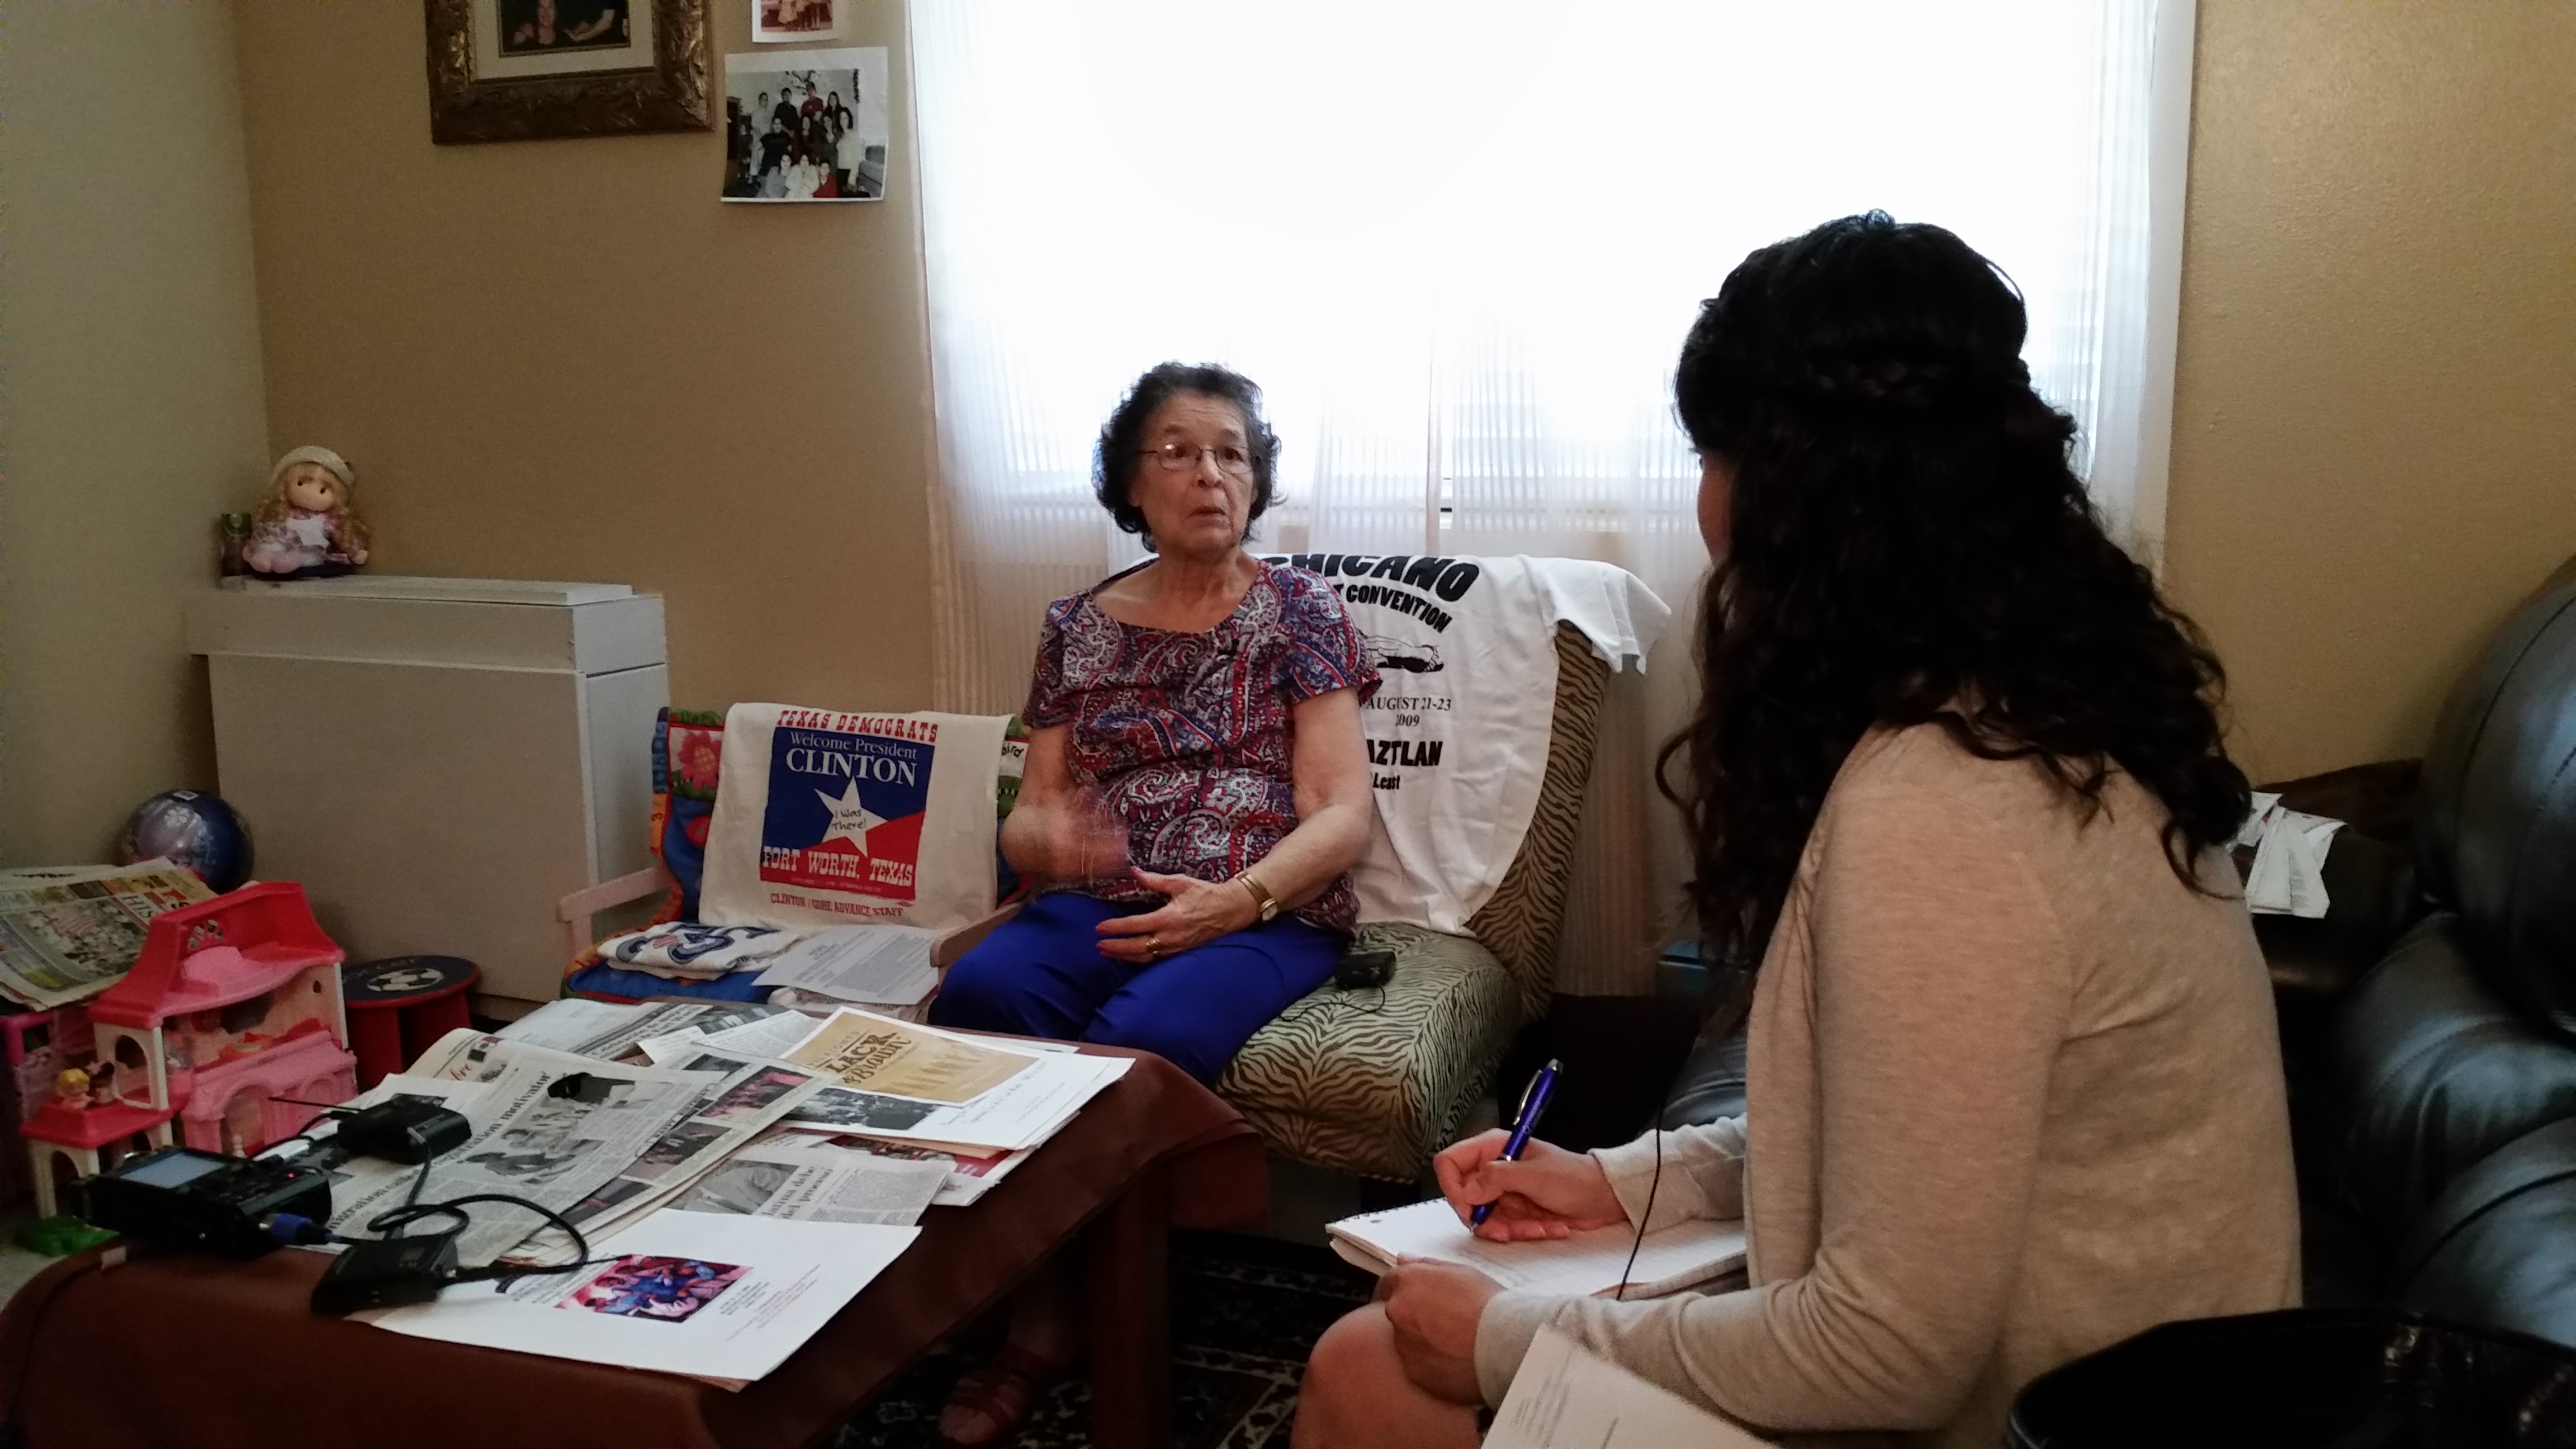 Pauline Valenciano Gasca (1936–2018) being interviewed by Sandra Enríquez at her home in Fort Worth, Texas, June 10, 2015. Photo courtesy CRBB.